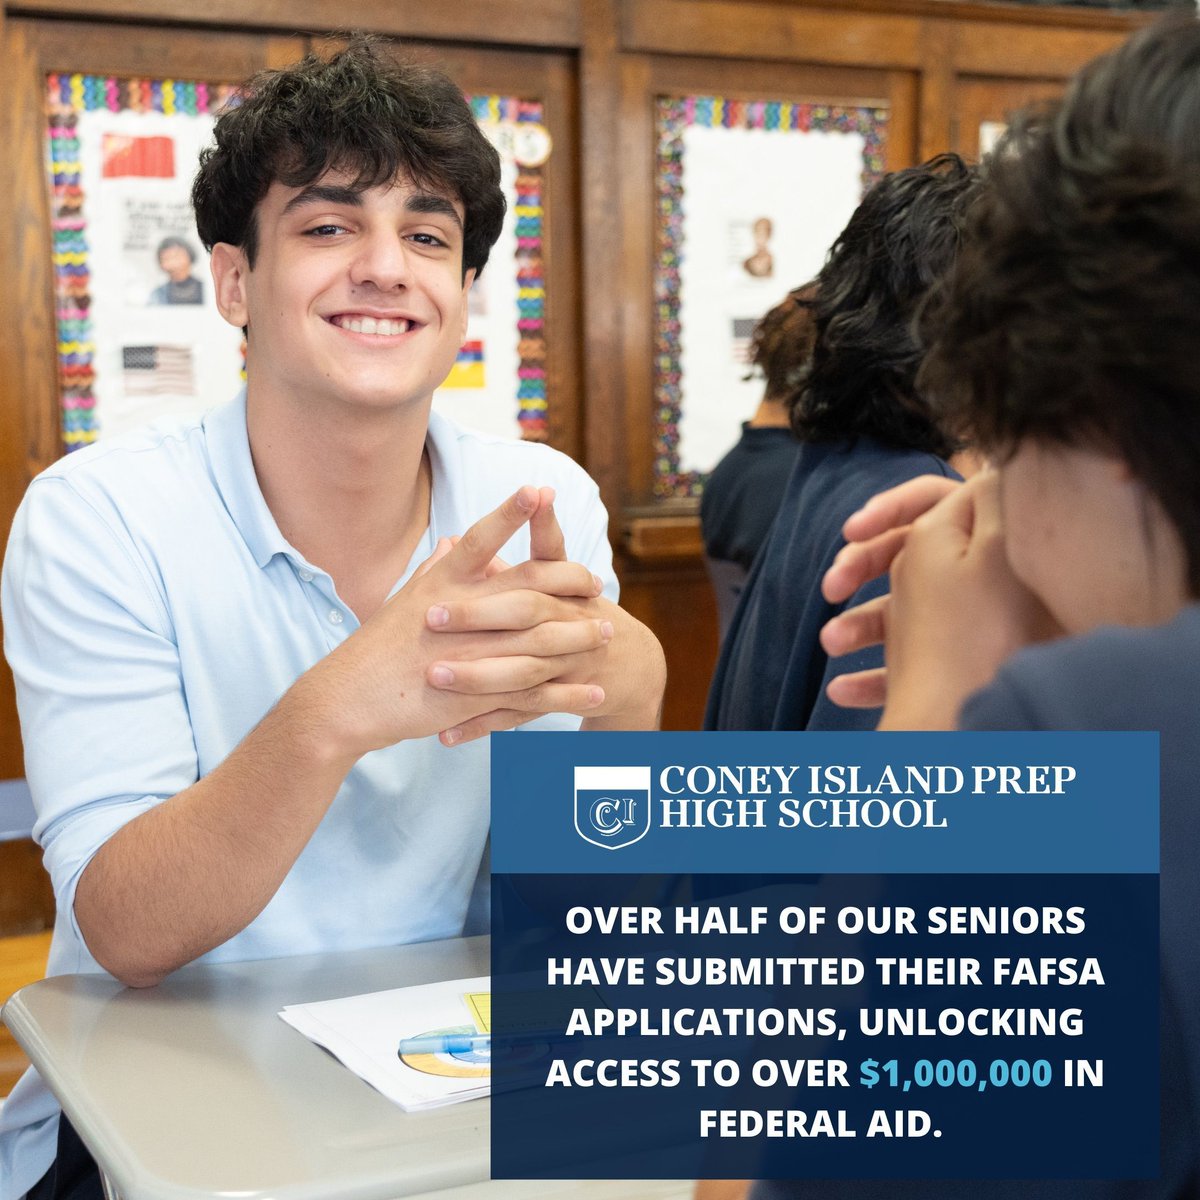 We are thrilled to share a milestone moment for the Class of 2024 at CIPHS! More than half of our determined seniors have completed their FAFSA applications, this collective effort has unlocked access to over $1,000,000 in federal aid, powering the dreams of tomorrow’s leaders!